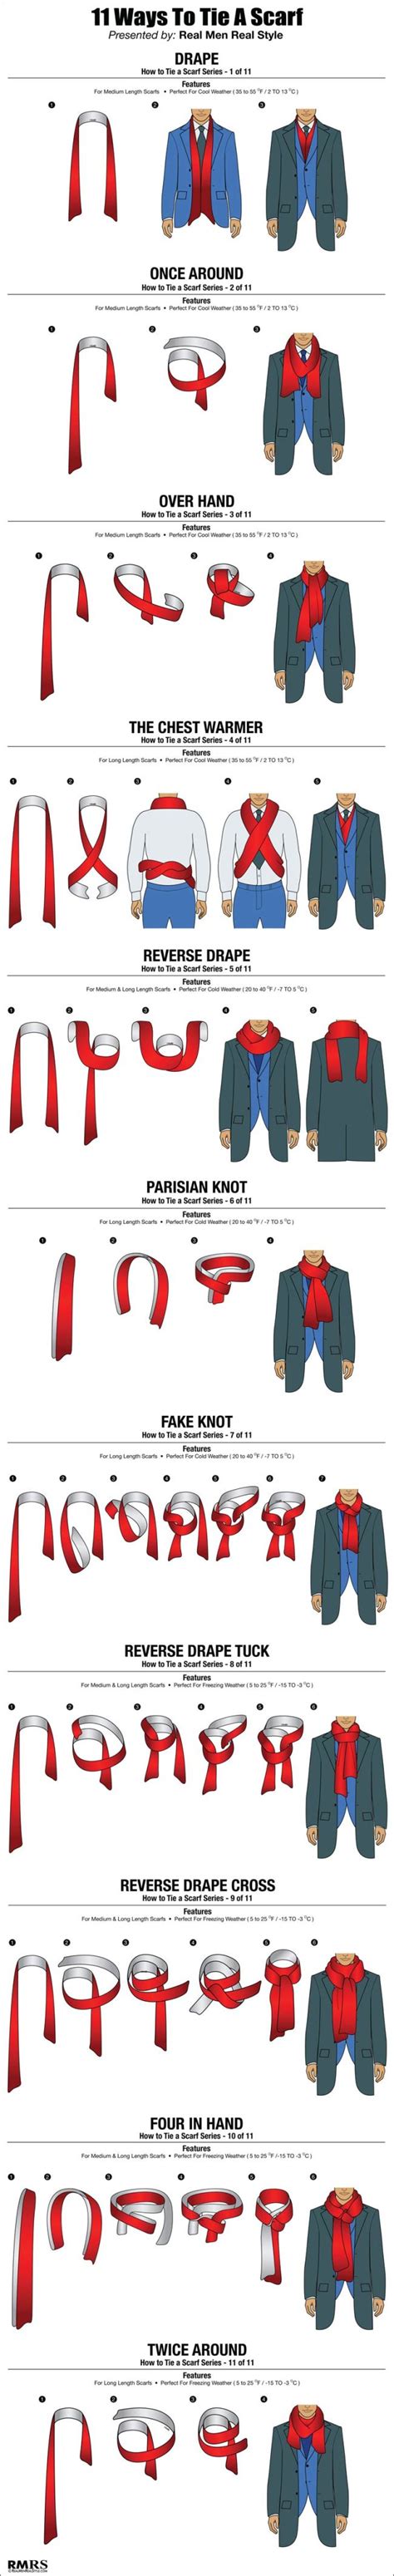 In other words, how you wear the. 11 ways to tie a scarf | Men style tips, Mens fashion:__cat__, Ways to tie scarves